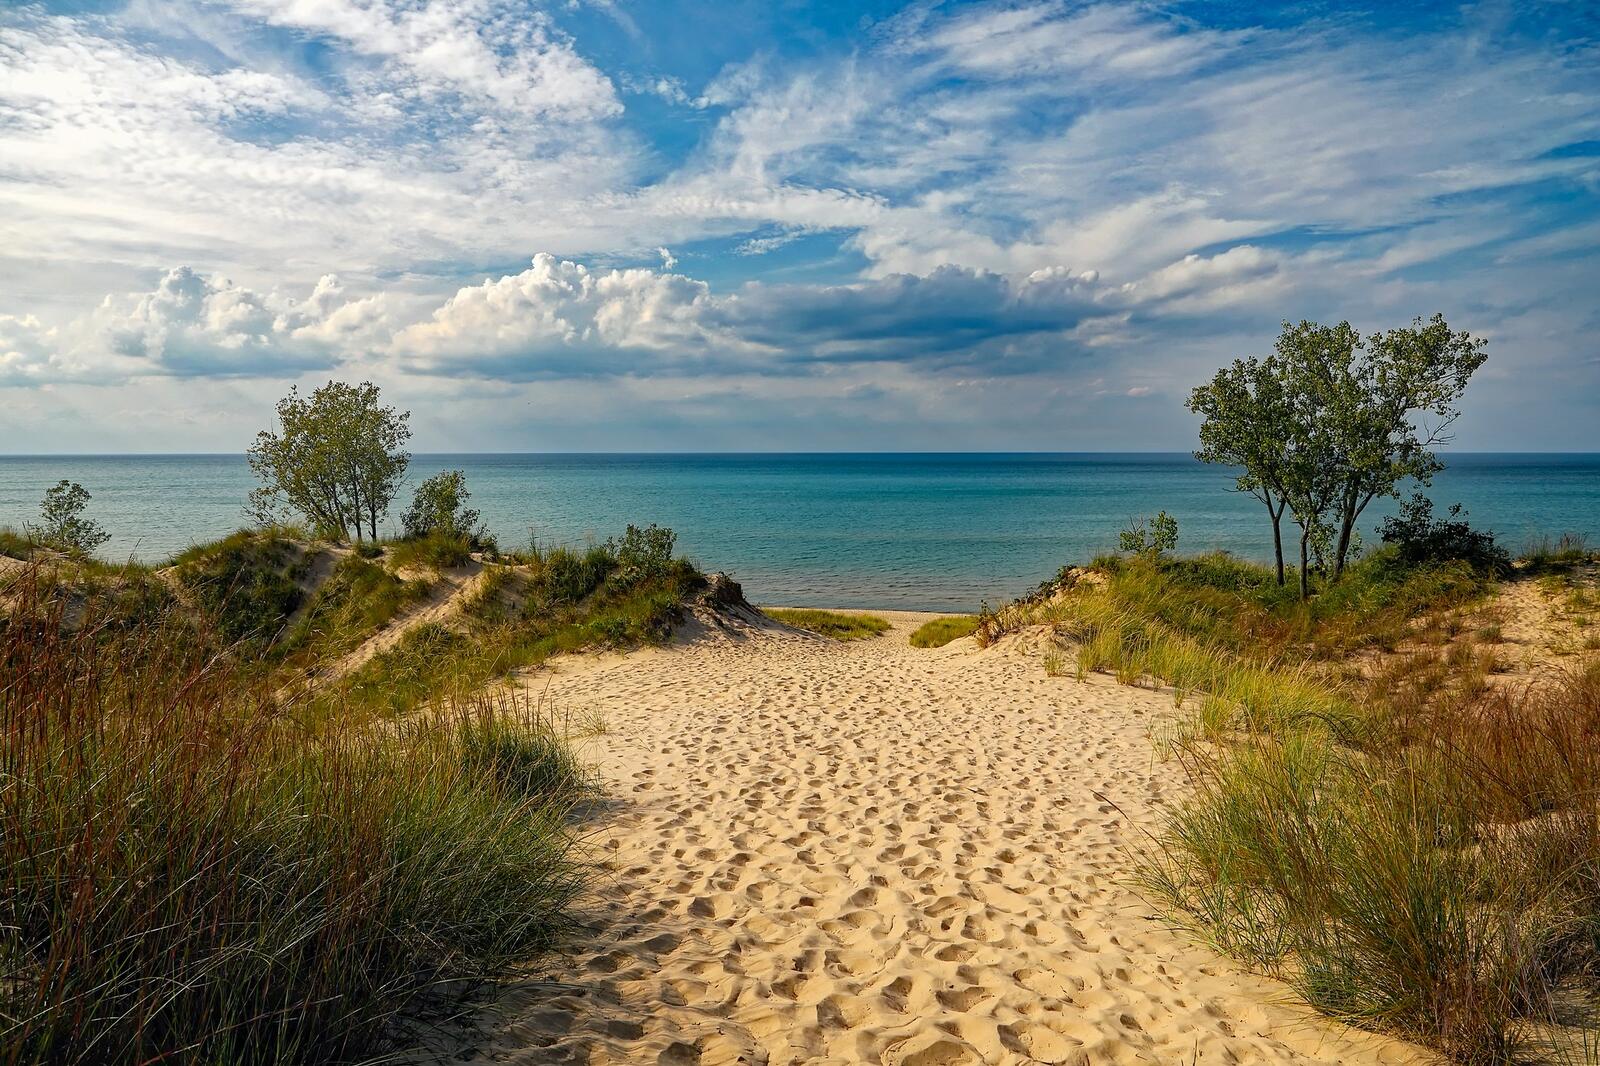 Wallpapers indiana dunes state park beach lake Michigan the sky on the desktop